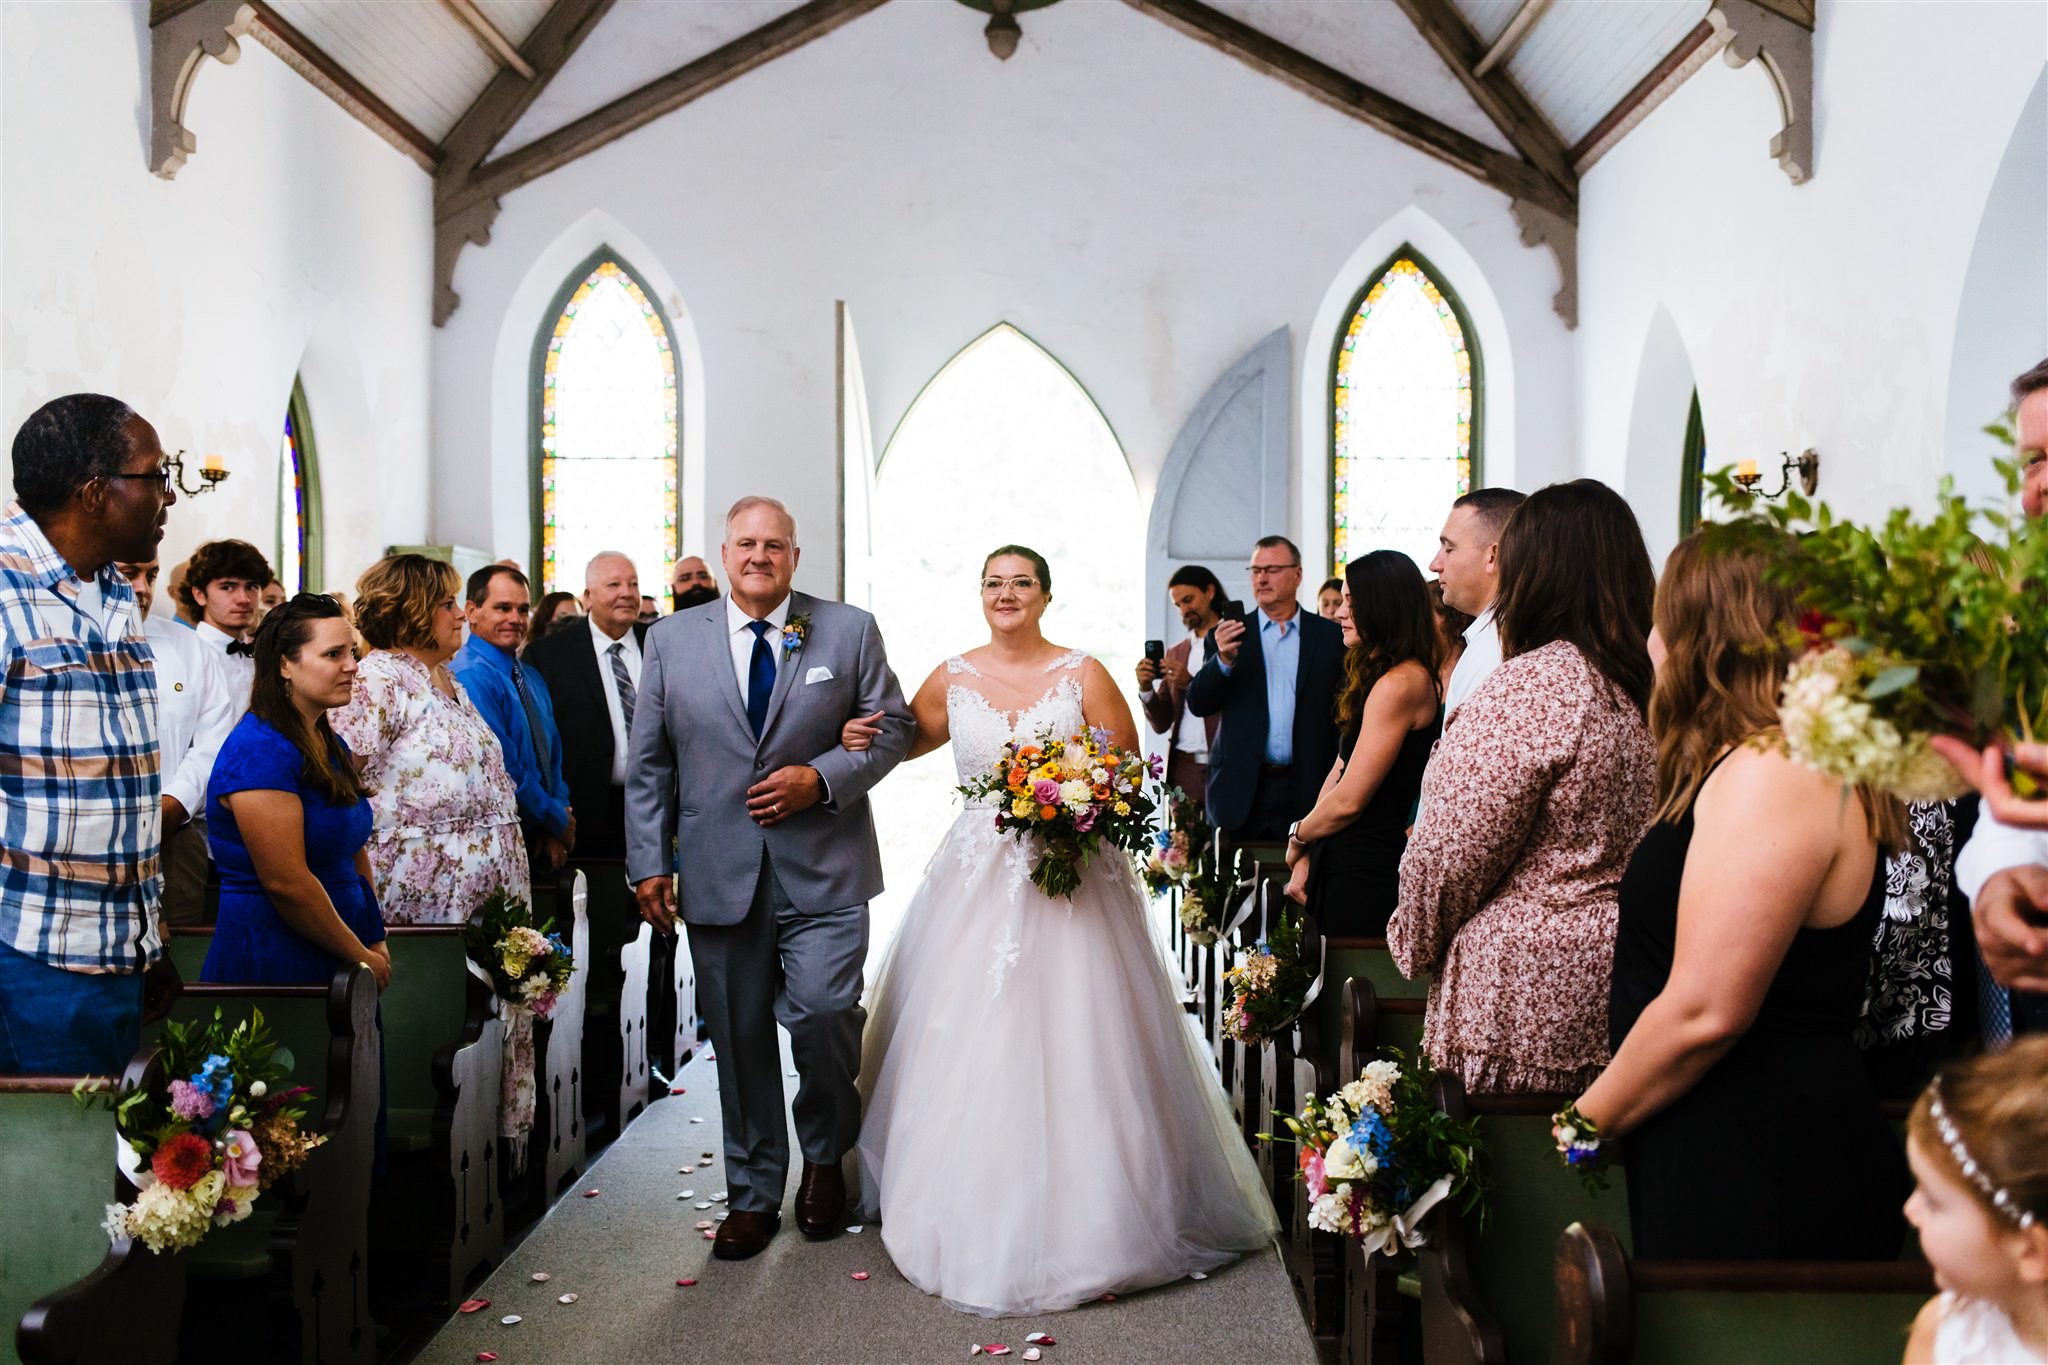 The bride walks down the aisle with her father at the small chapel at the Fontainebleau Inn in Alpine, NY.